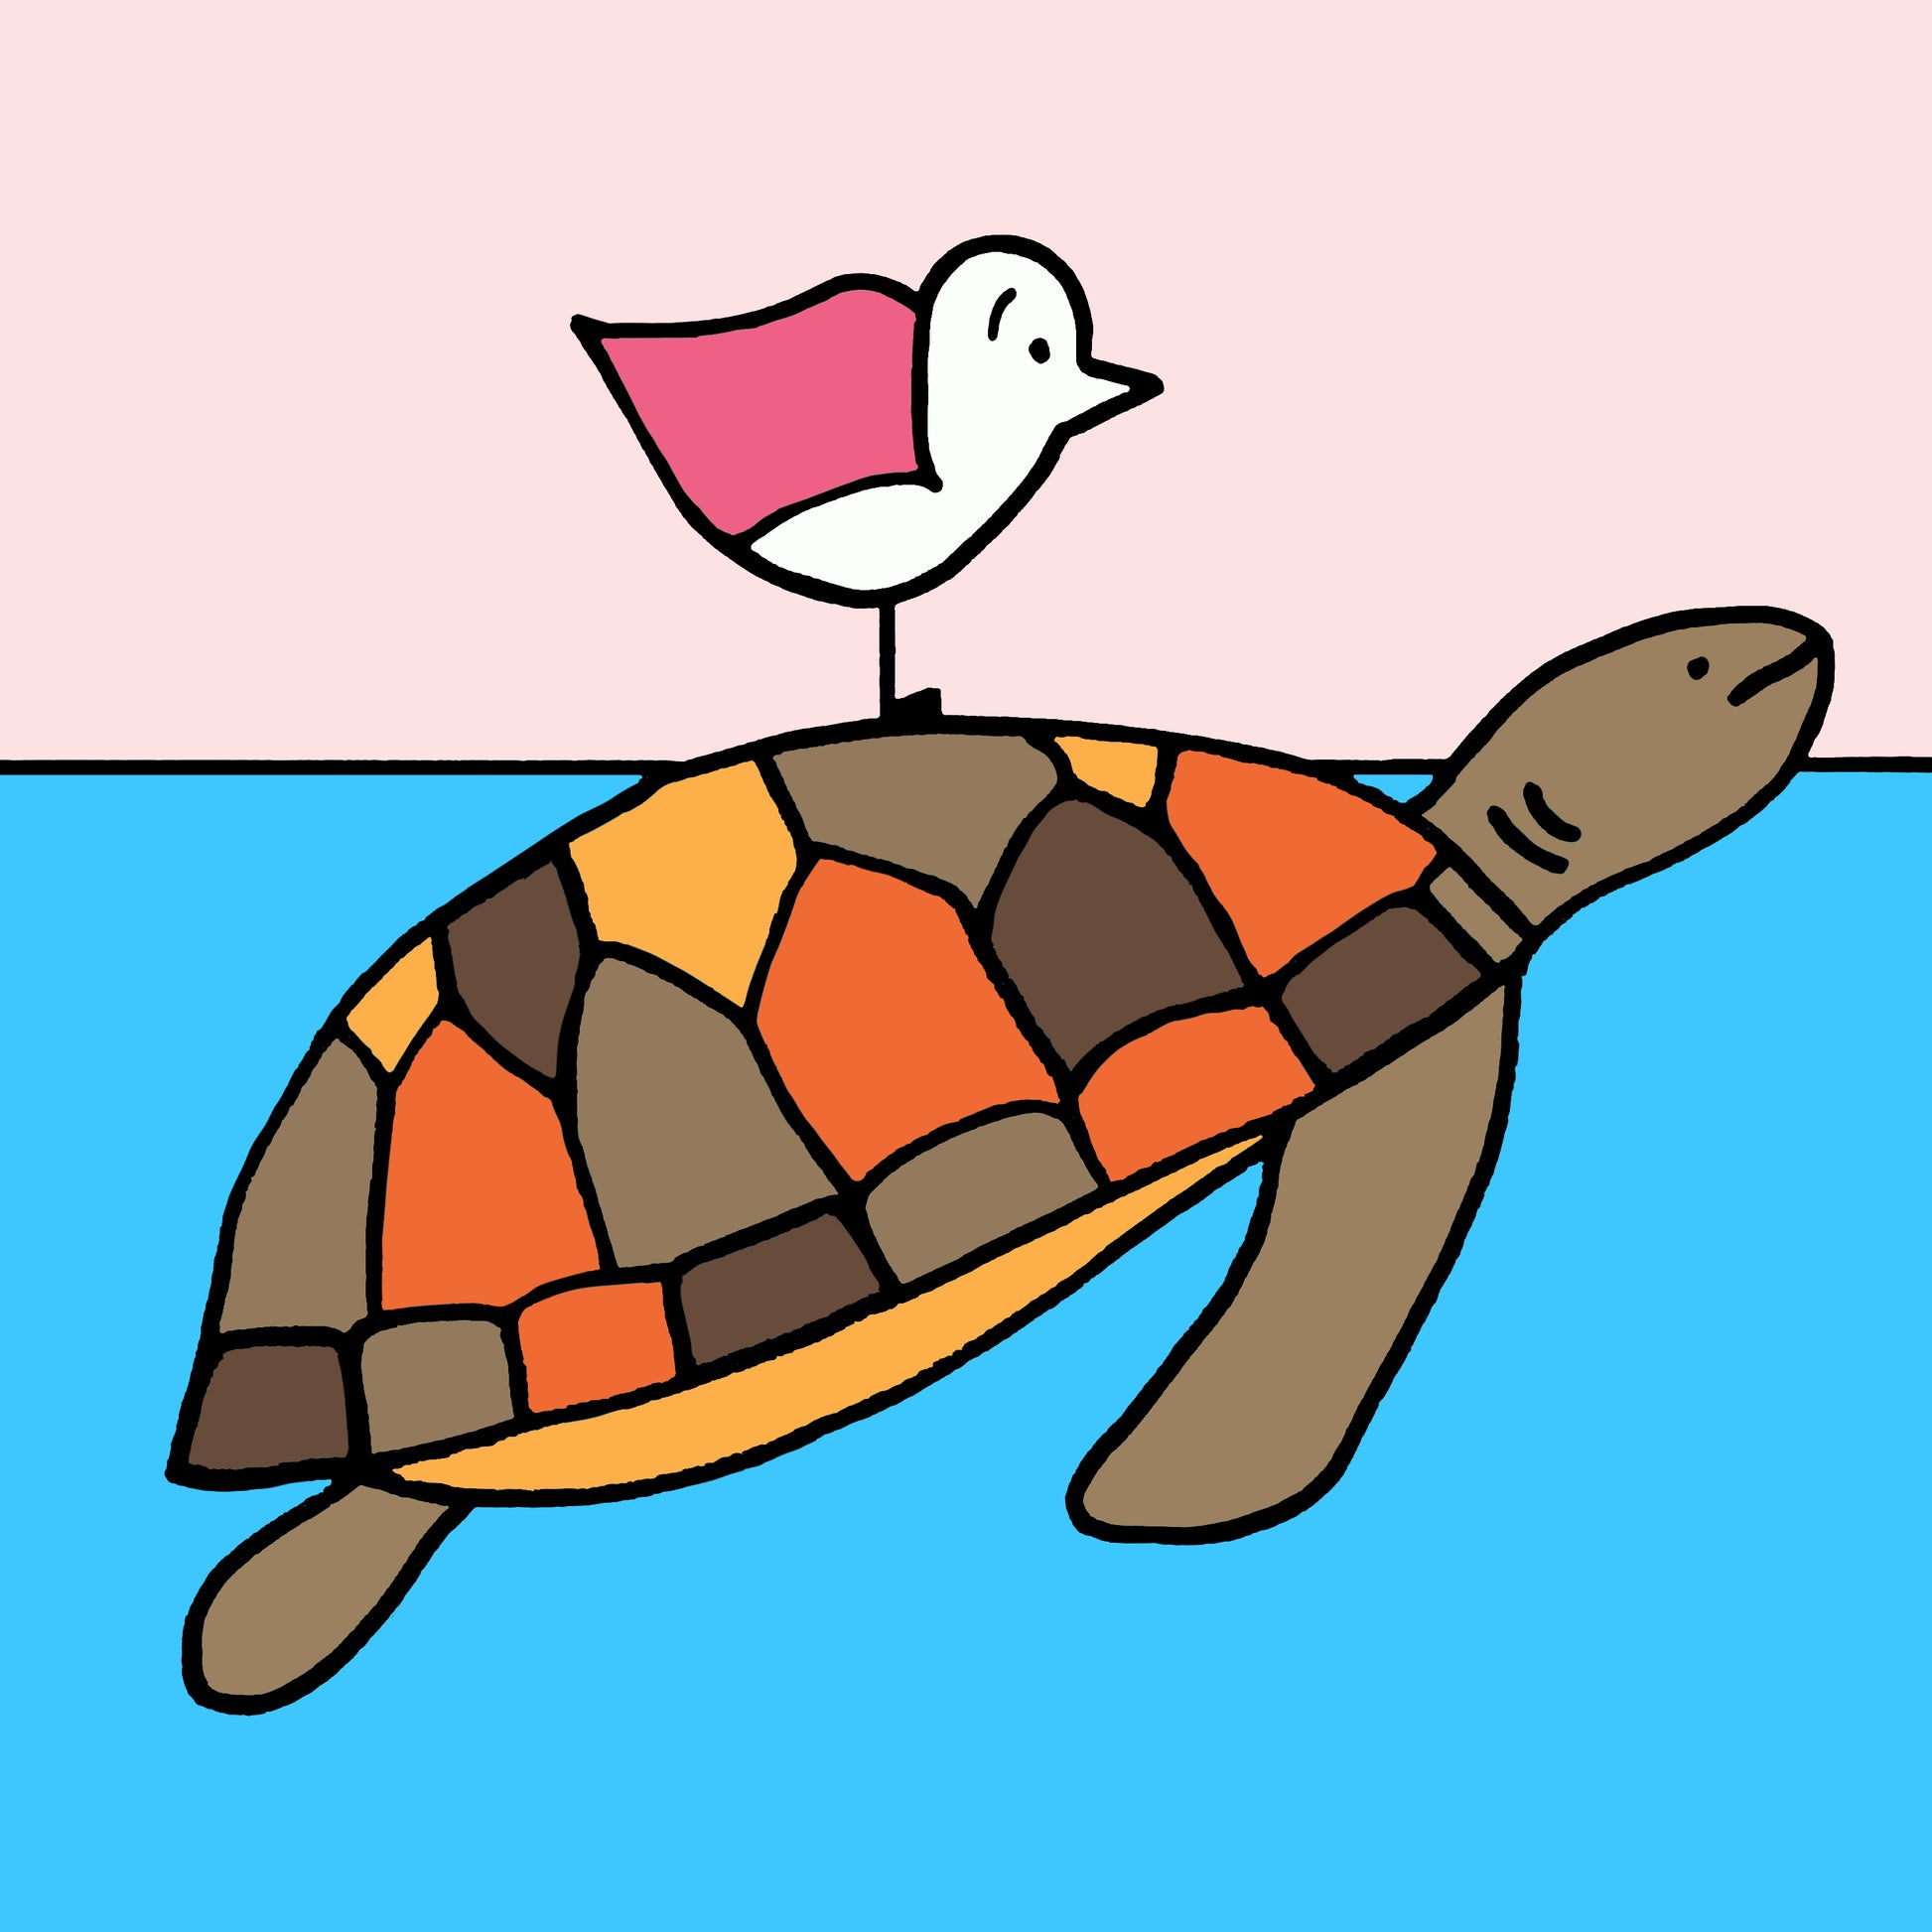 A turtle with orange, ochres and browns on it's shell. The turtle is swimming in bright blue aqua water with a pink winged seagull perched on its back. The sky is a pale pink and all the details and shapes are outlined in thick black. The print is called ride on time.